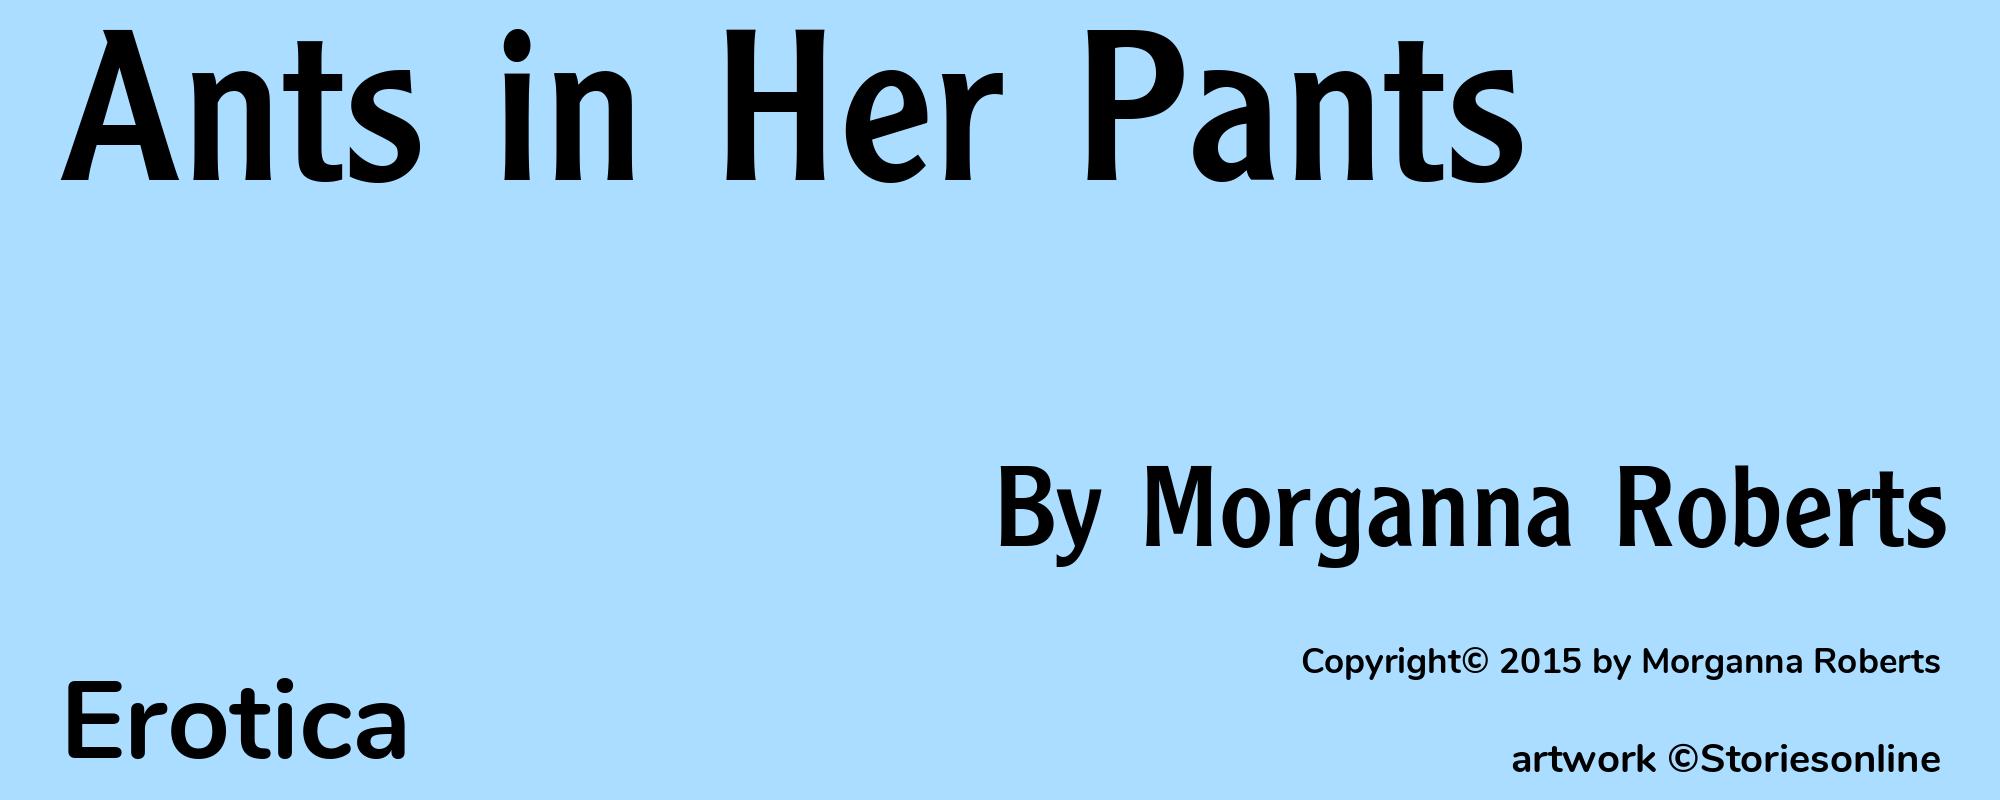 Ants in Her Pants - Cover